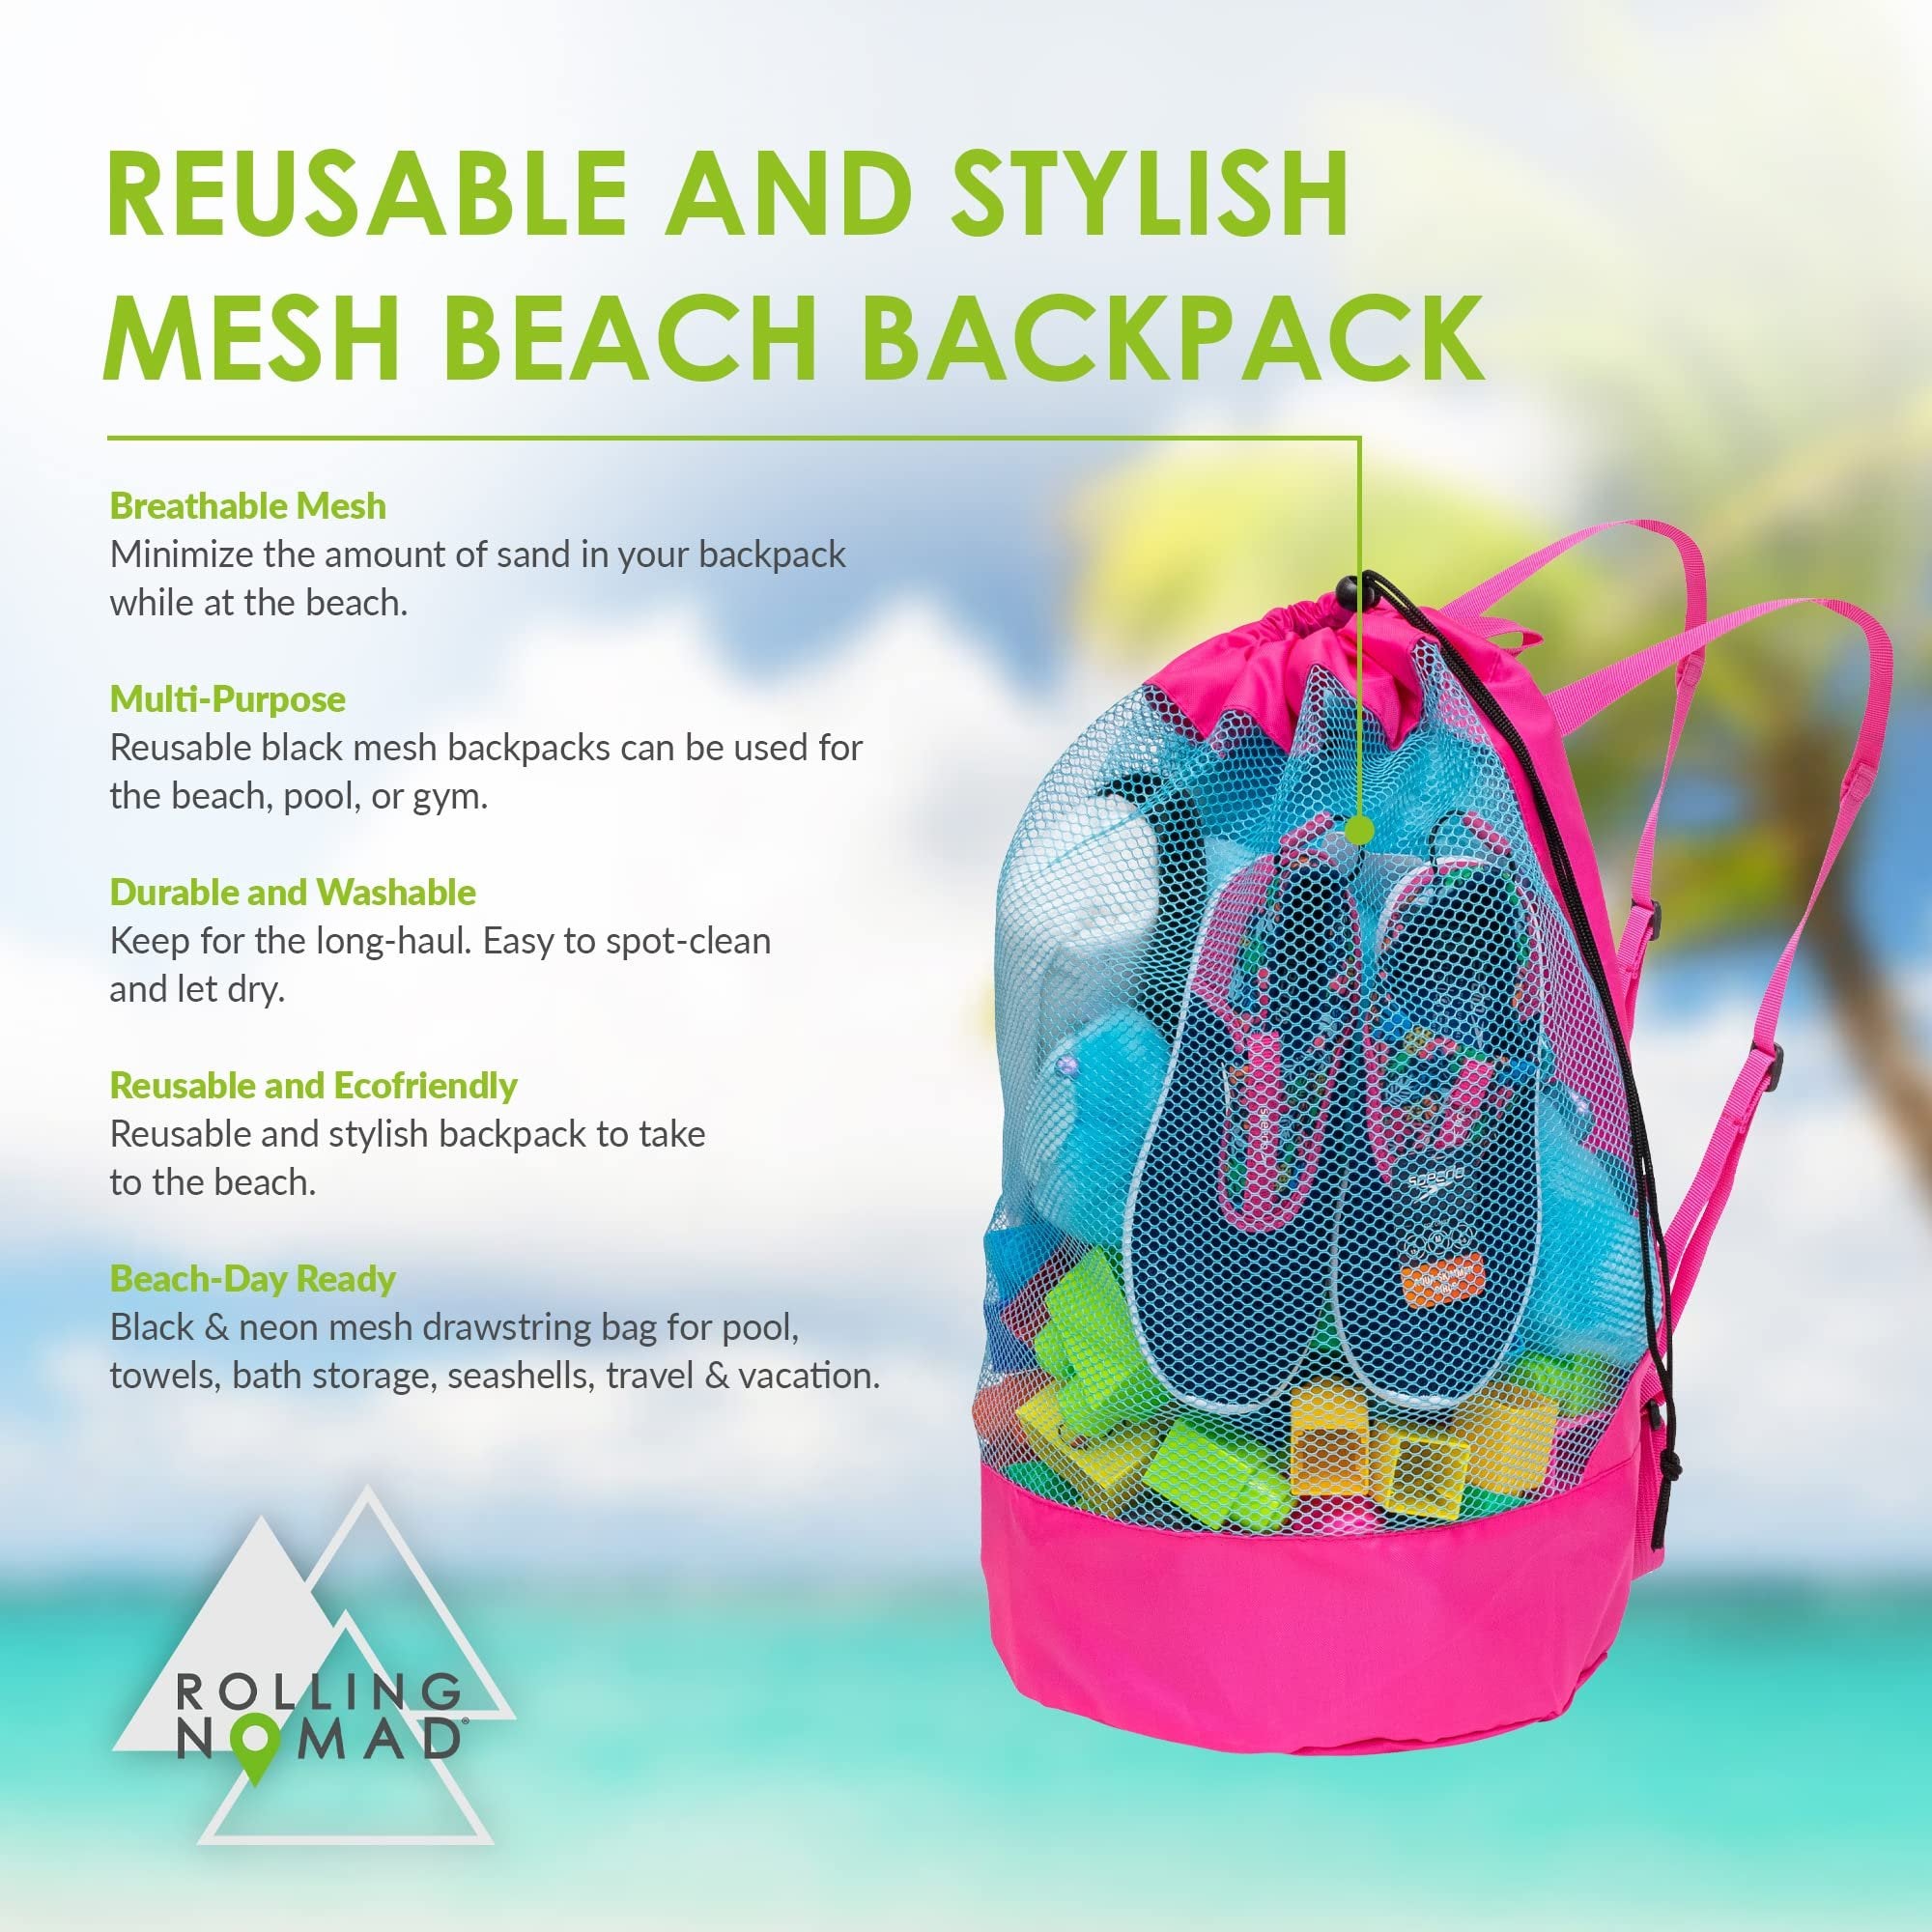 Beach Toy Bag - Large Mesh Beach Bag, Cute Blue & Pink Backpack, Beach Essentials for Vacation, Travel, Pool, Toys, Beach Towels, Swim Necessities, Summer Must Haves, Packable Tote for Men & Women